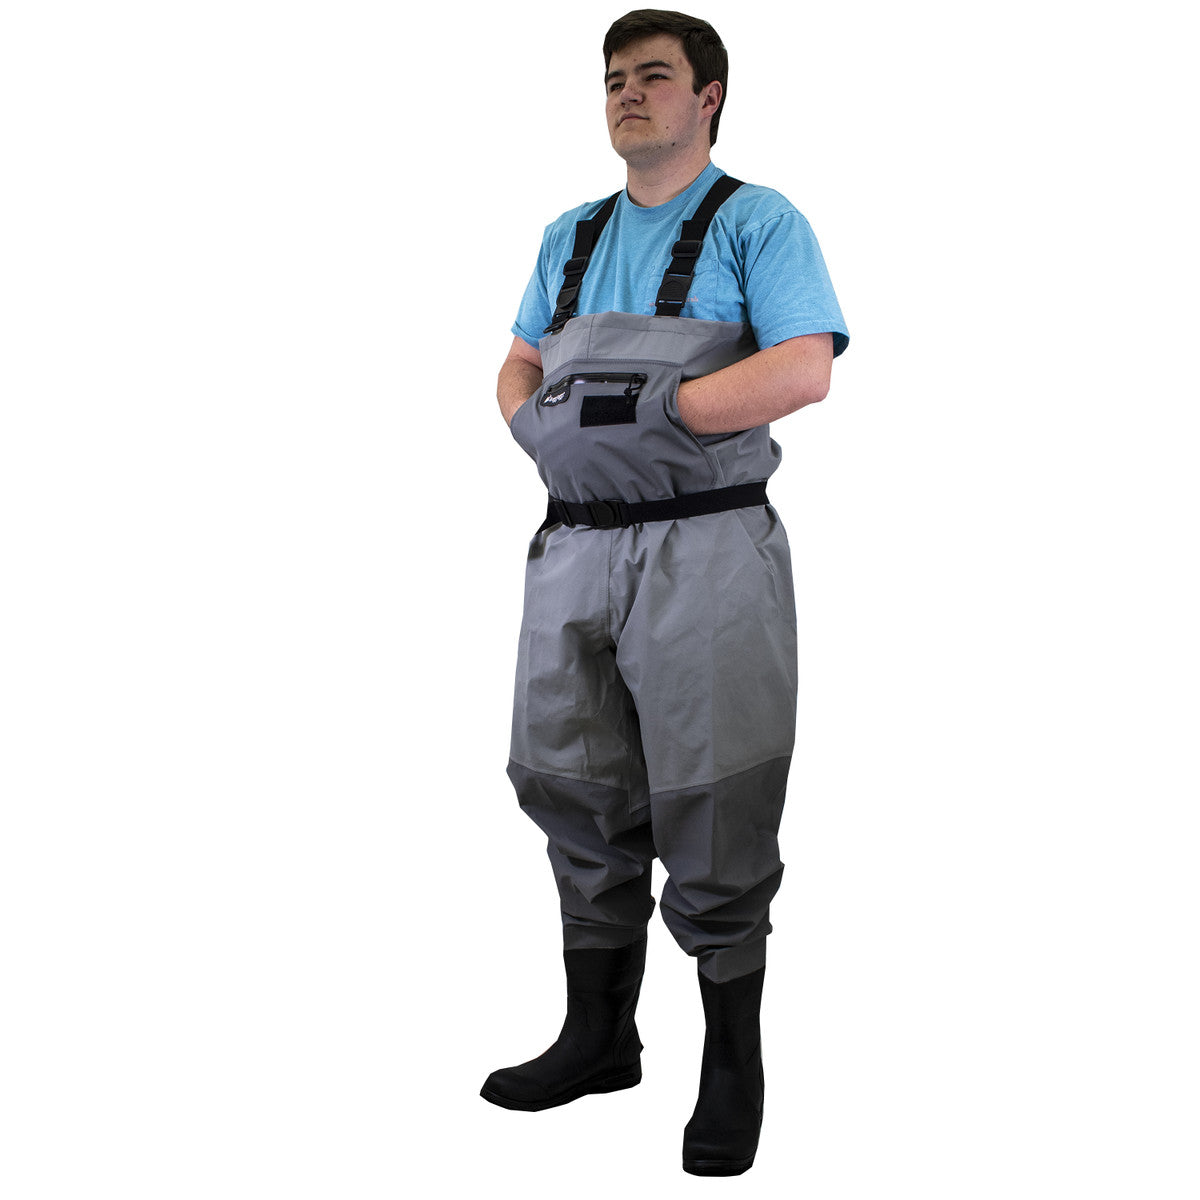 Frogg Toggs Men's Hellbender PRO Bootfoot Lug Sole Chest Wader, Gray